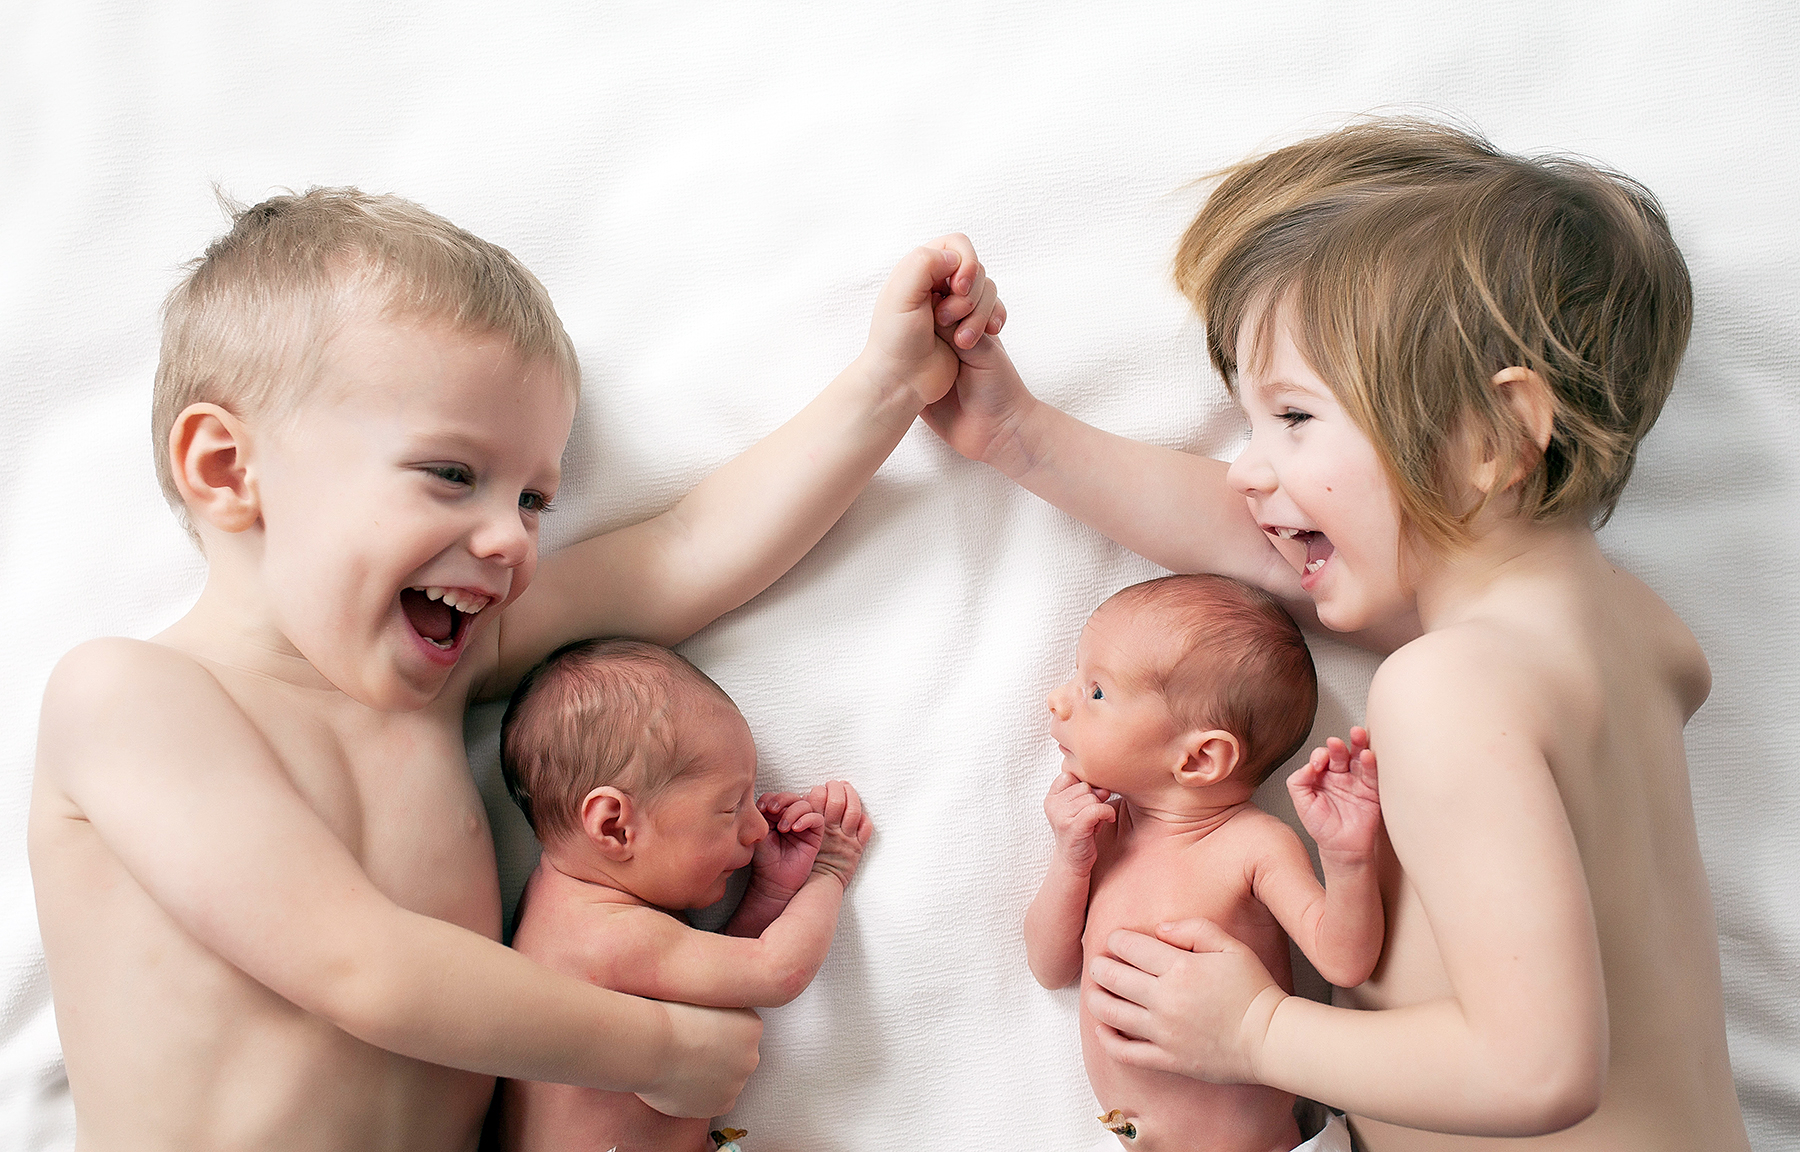 This Photo of Toddler Twins Cuddling Newborn Twin Sisters Is Too Cute